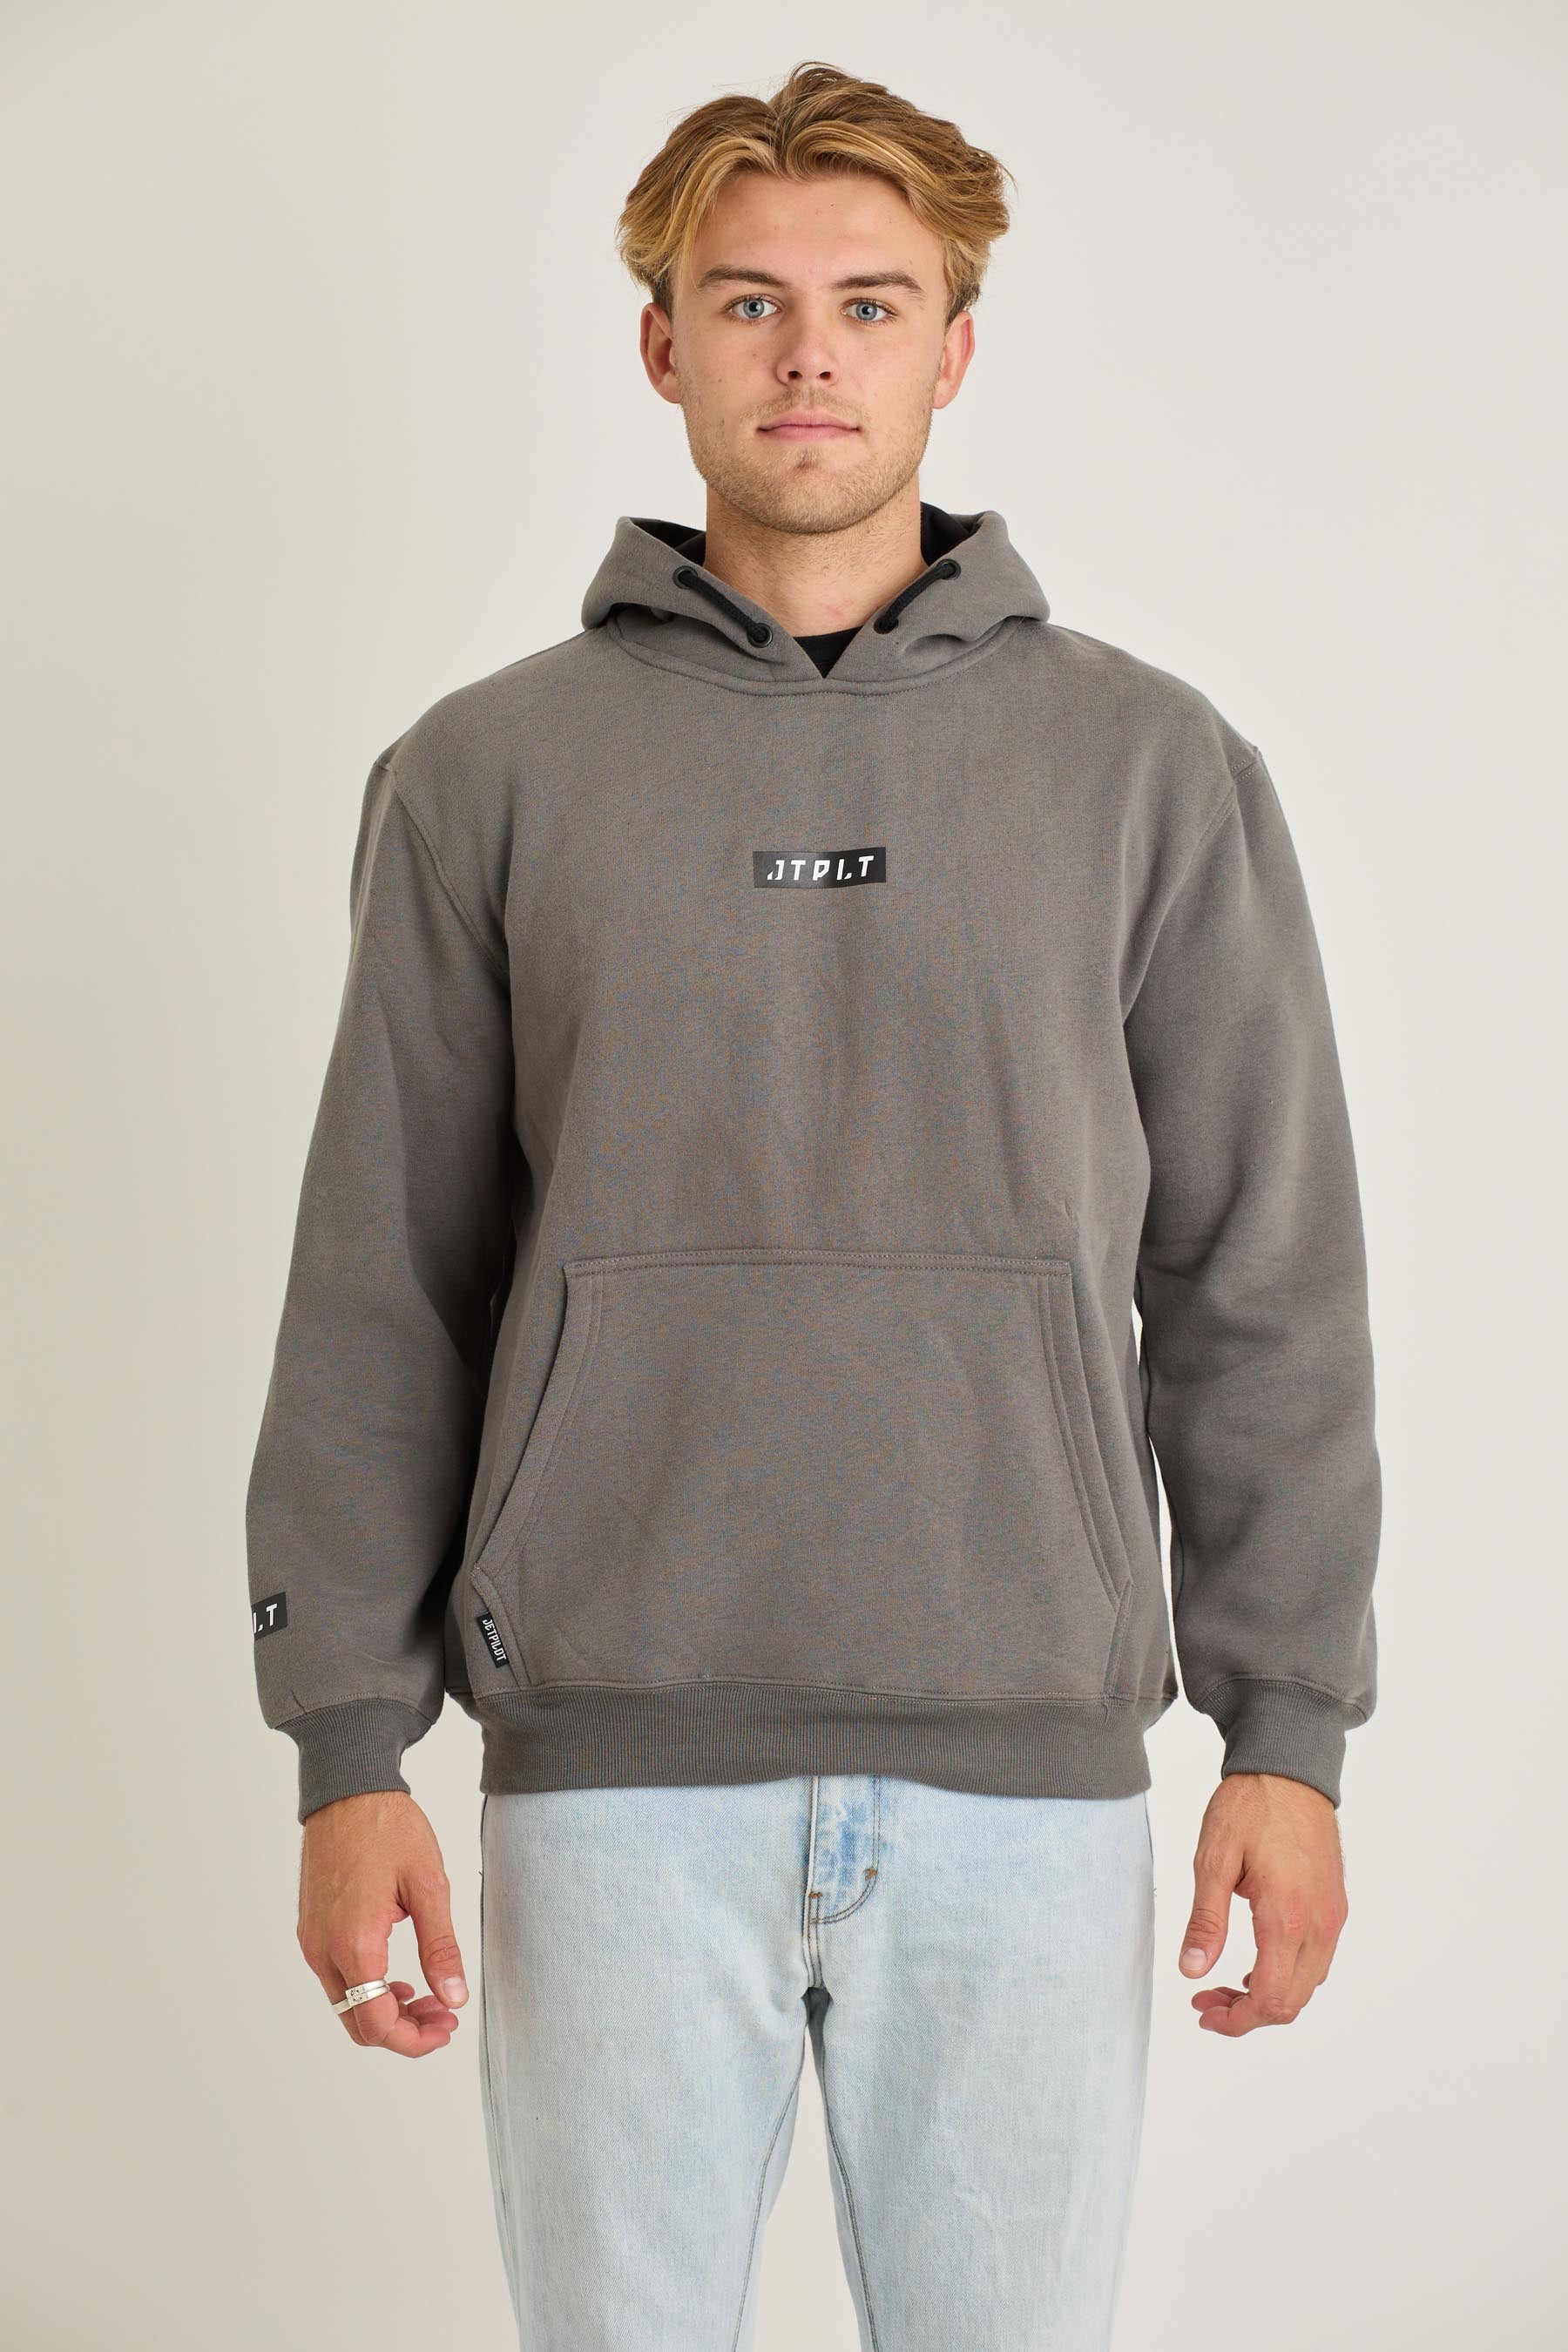 Jetpilot Corp Mens Pullover - Charcoal 3